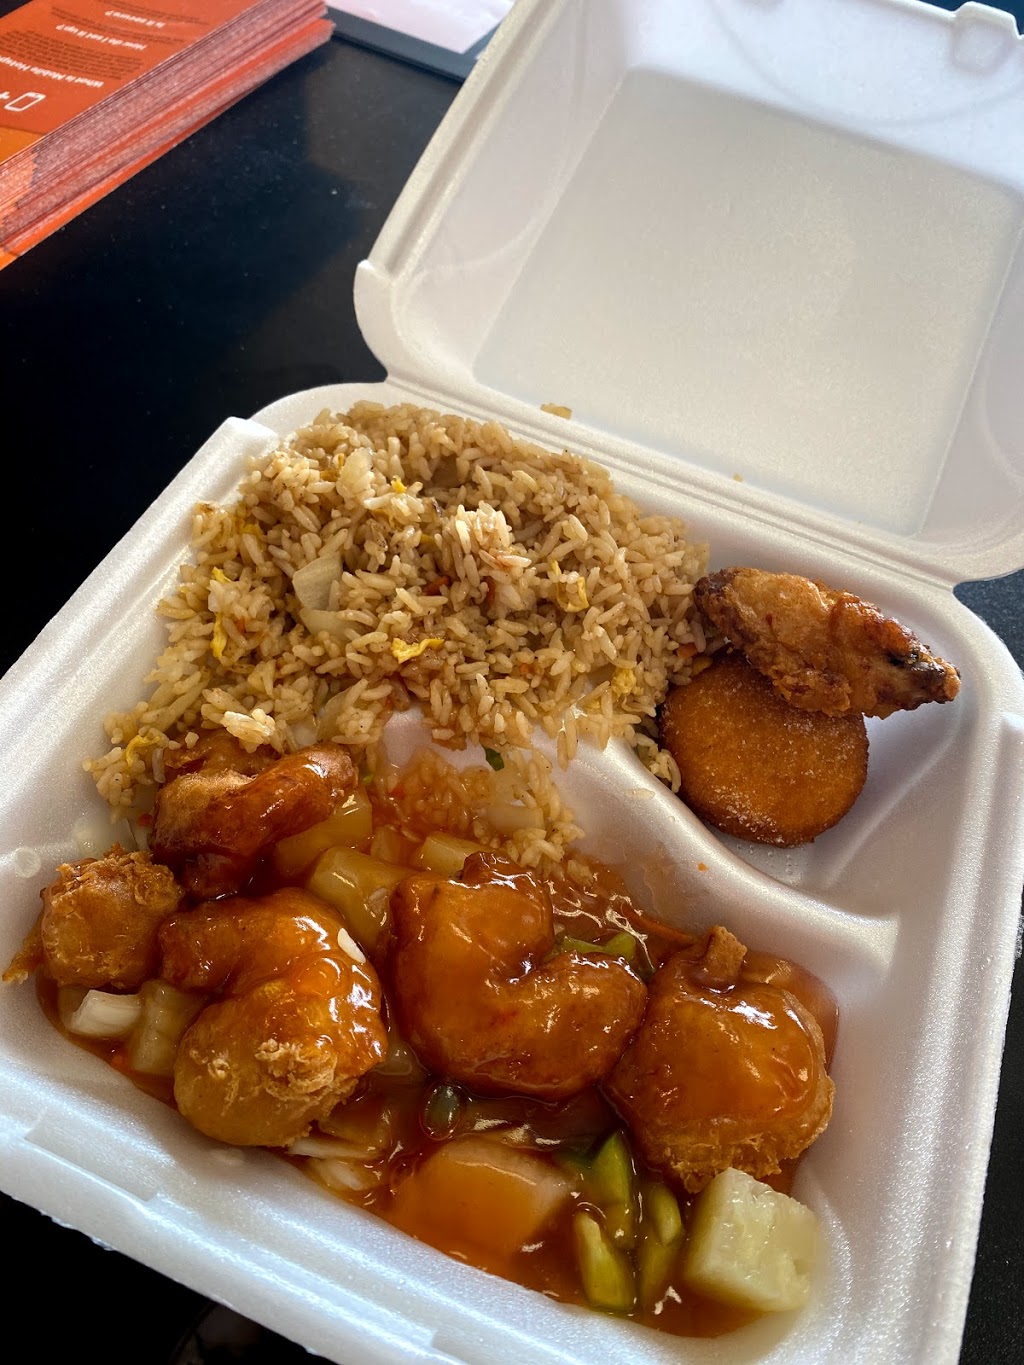 Formosa Chinese Restaurant | 6685 Quince Rd, Memphis, TN 38119, USA | Phone: (901) 753-9898